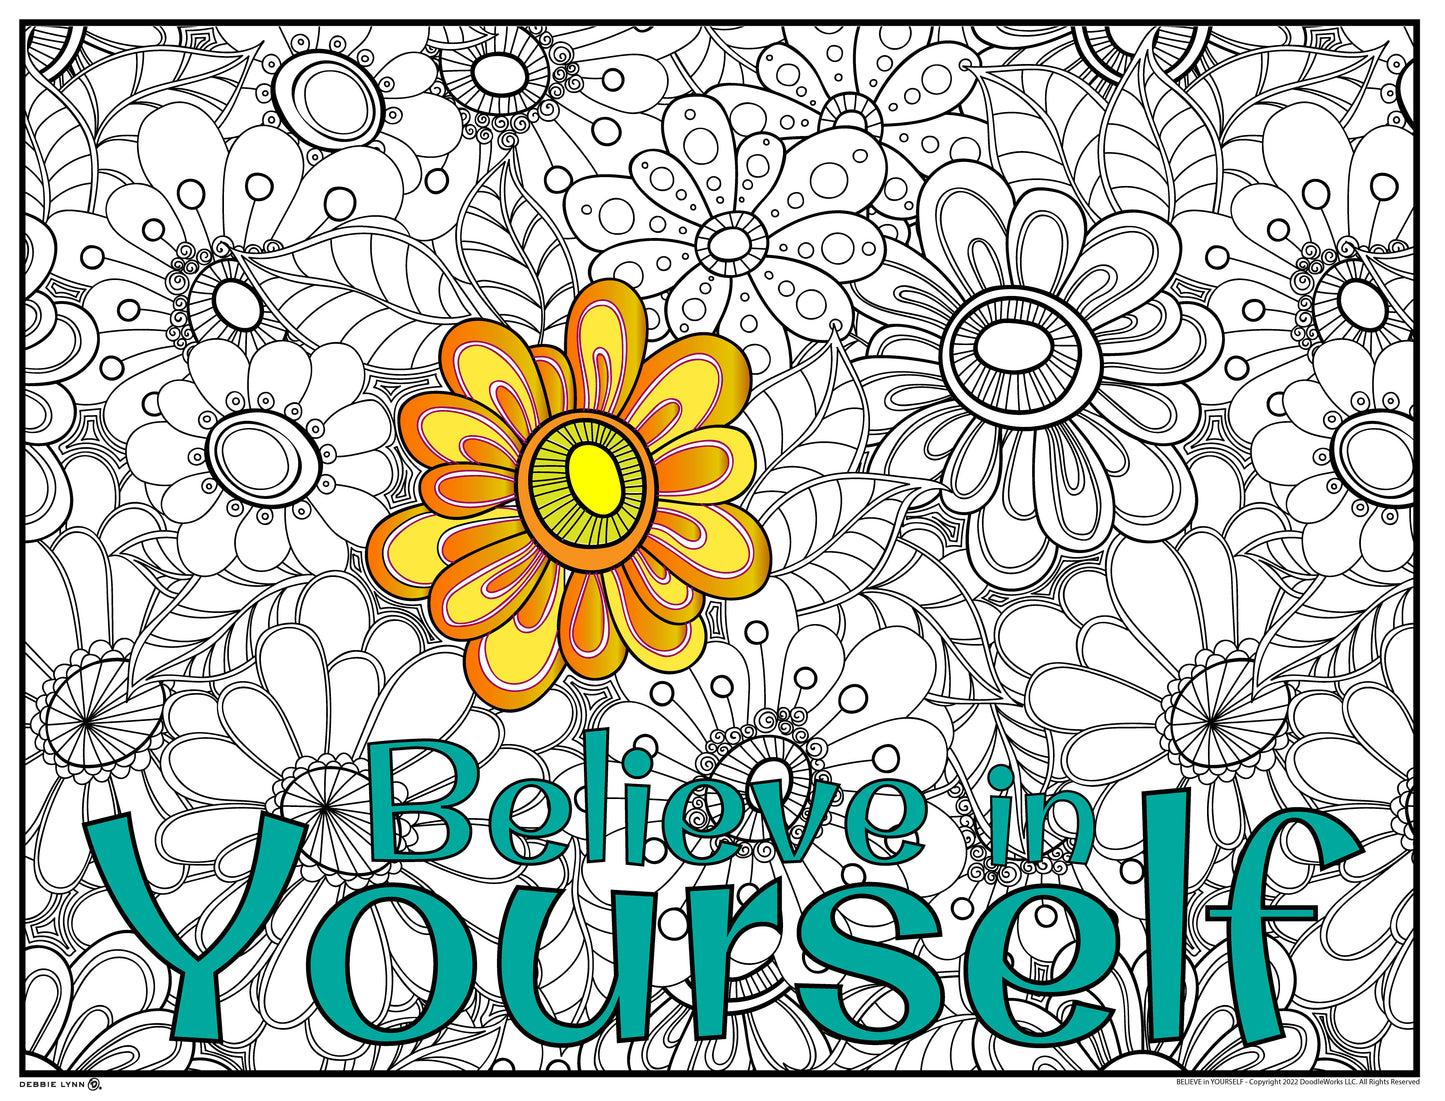 Believe in Yourself Personalized Giant Coloring Poster 46"x60"